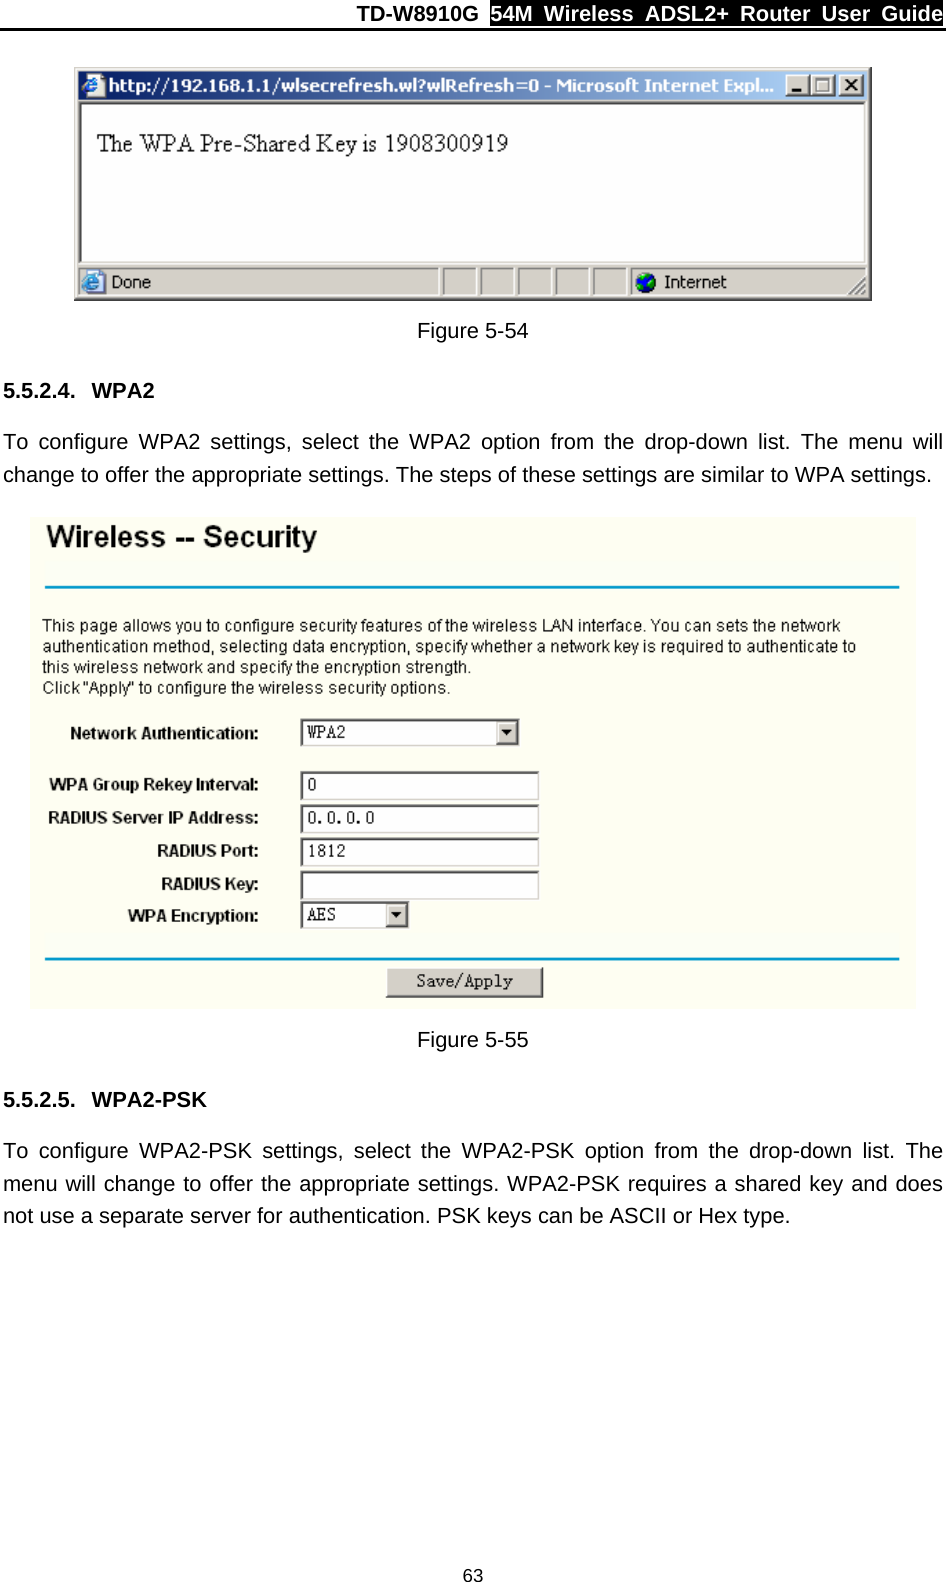 TD-W8910G  54M Wireless ADSL2+ Router User Guide  63 Figure 5-54 5.5.2.4. WPA2 To configure WPA2 settings, select the WPA2 option from the drop-down list. The menu will change to offer the appropriate settings. The steps of these settings are similar to WPA settings.  Figure 5-55 5.5.2.5. WPA2-PSK To configure WPA2-PSK settings, select the WPA2-PSK option from the drop-down list. The menu will change to offer the appropriate settings. WPA2-PSK requires a shared key and does not use a separate server for authentication. PSK keys can be ASCII or Hex type. 